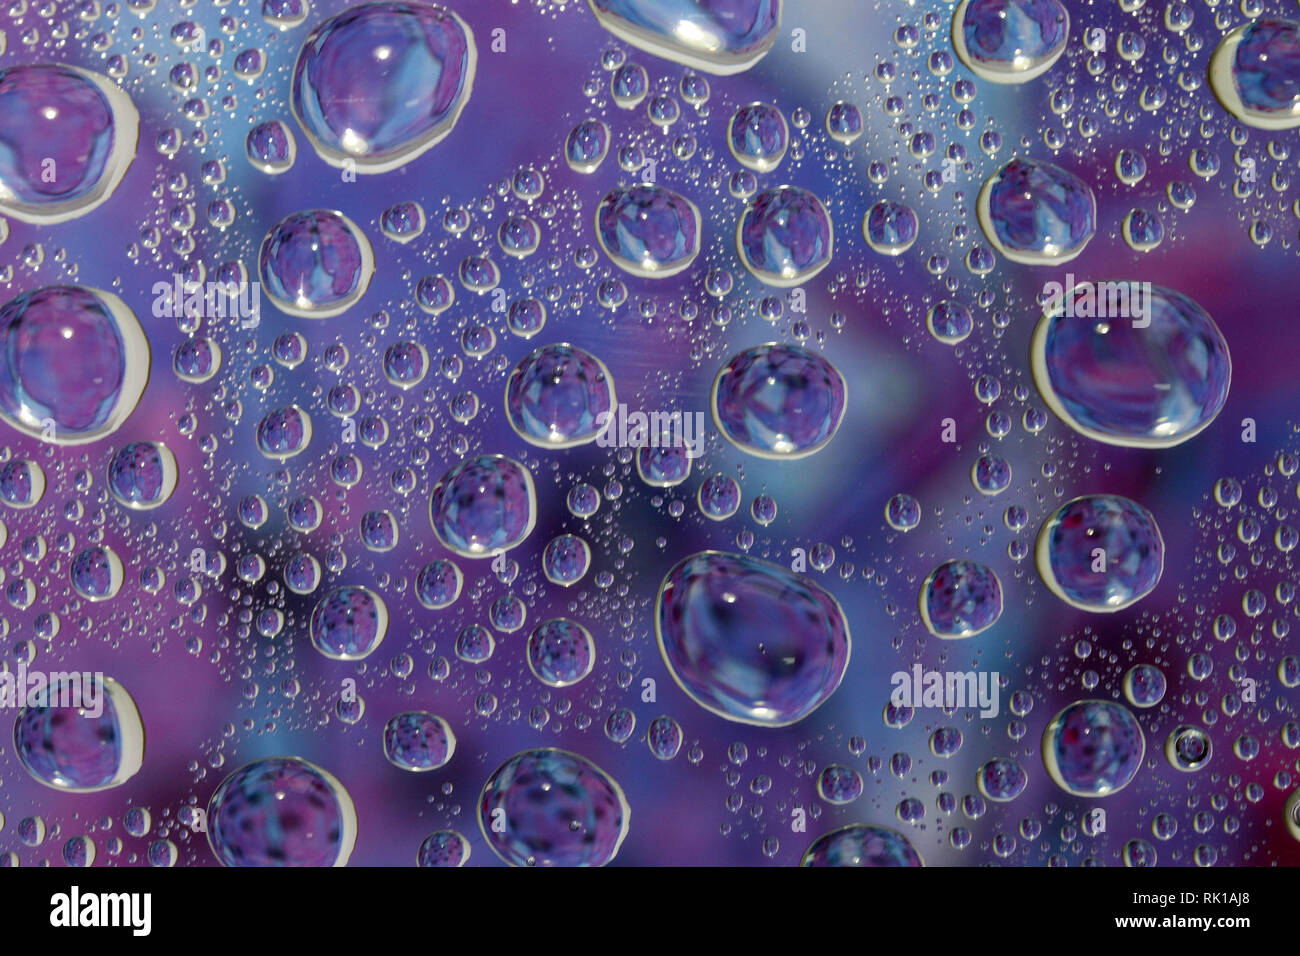 Water droplets Stock Photo